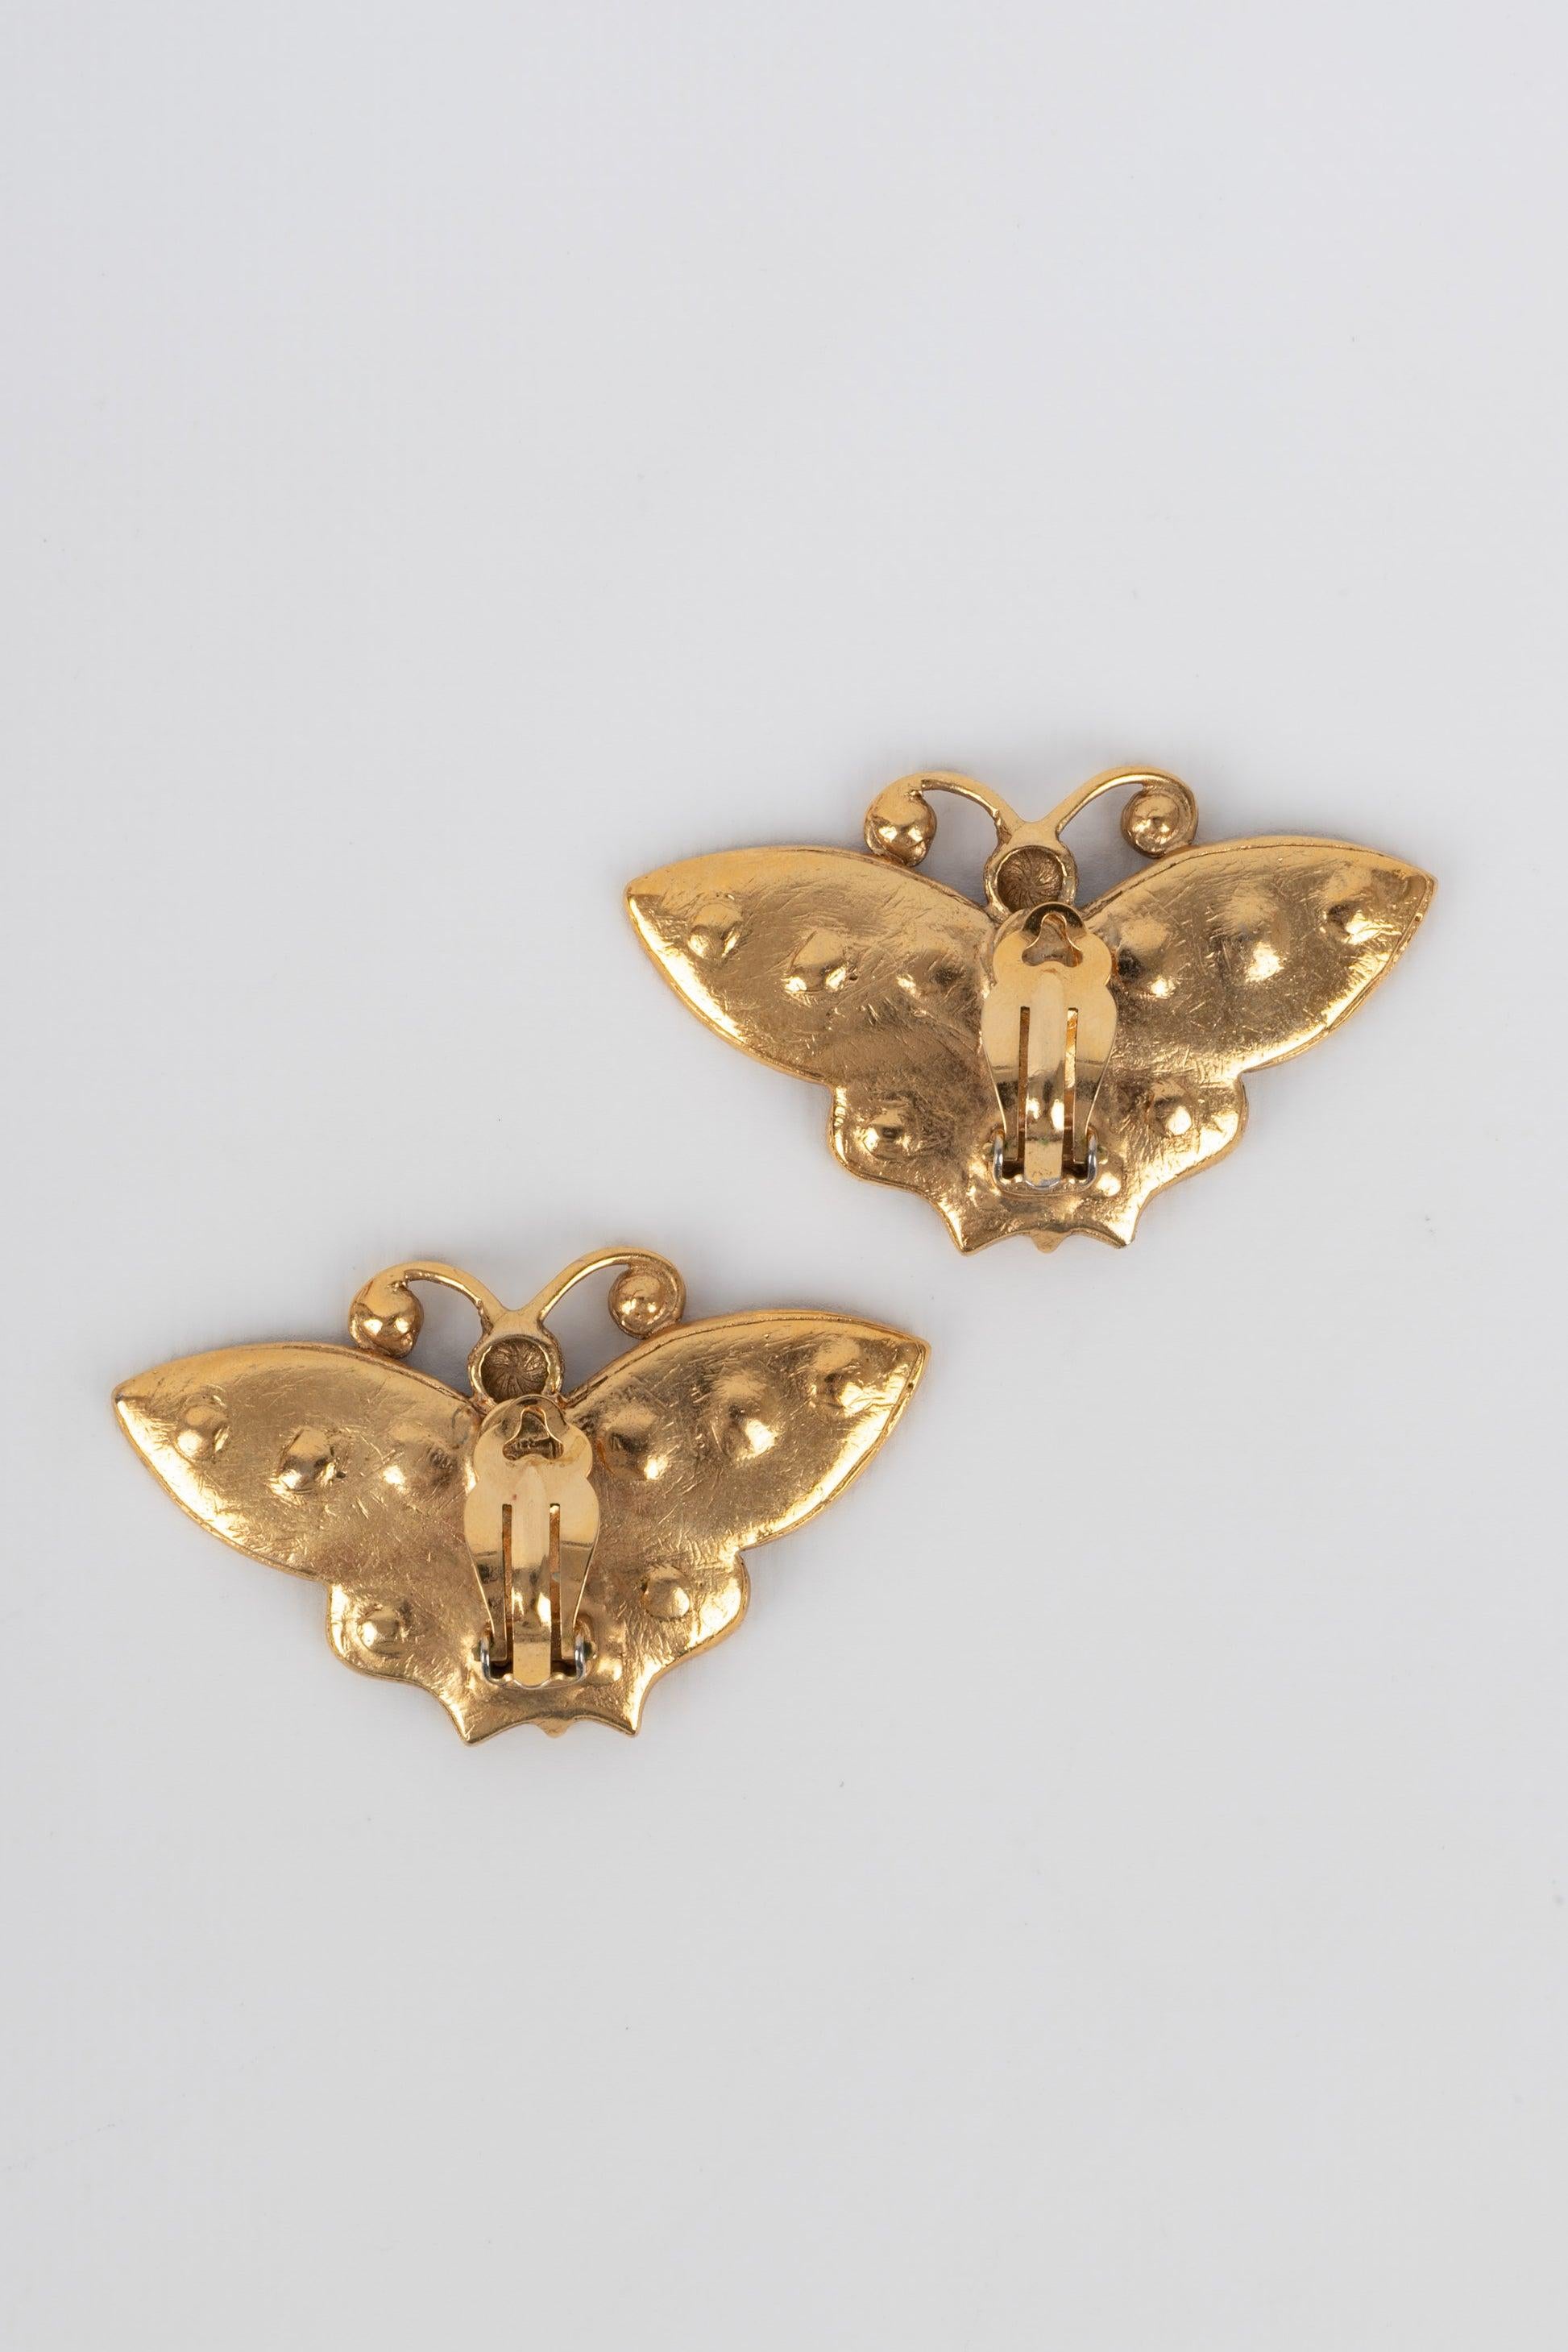 Dior - Golden metal and rhinestone earrings.

Additional information:
Condition: Very good condition
Dimensions: 3.5 cm x 6 cm

Seller Reference: BO166